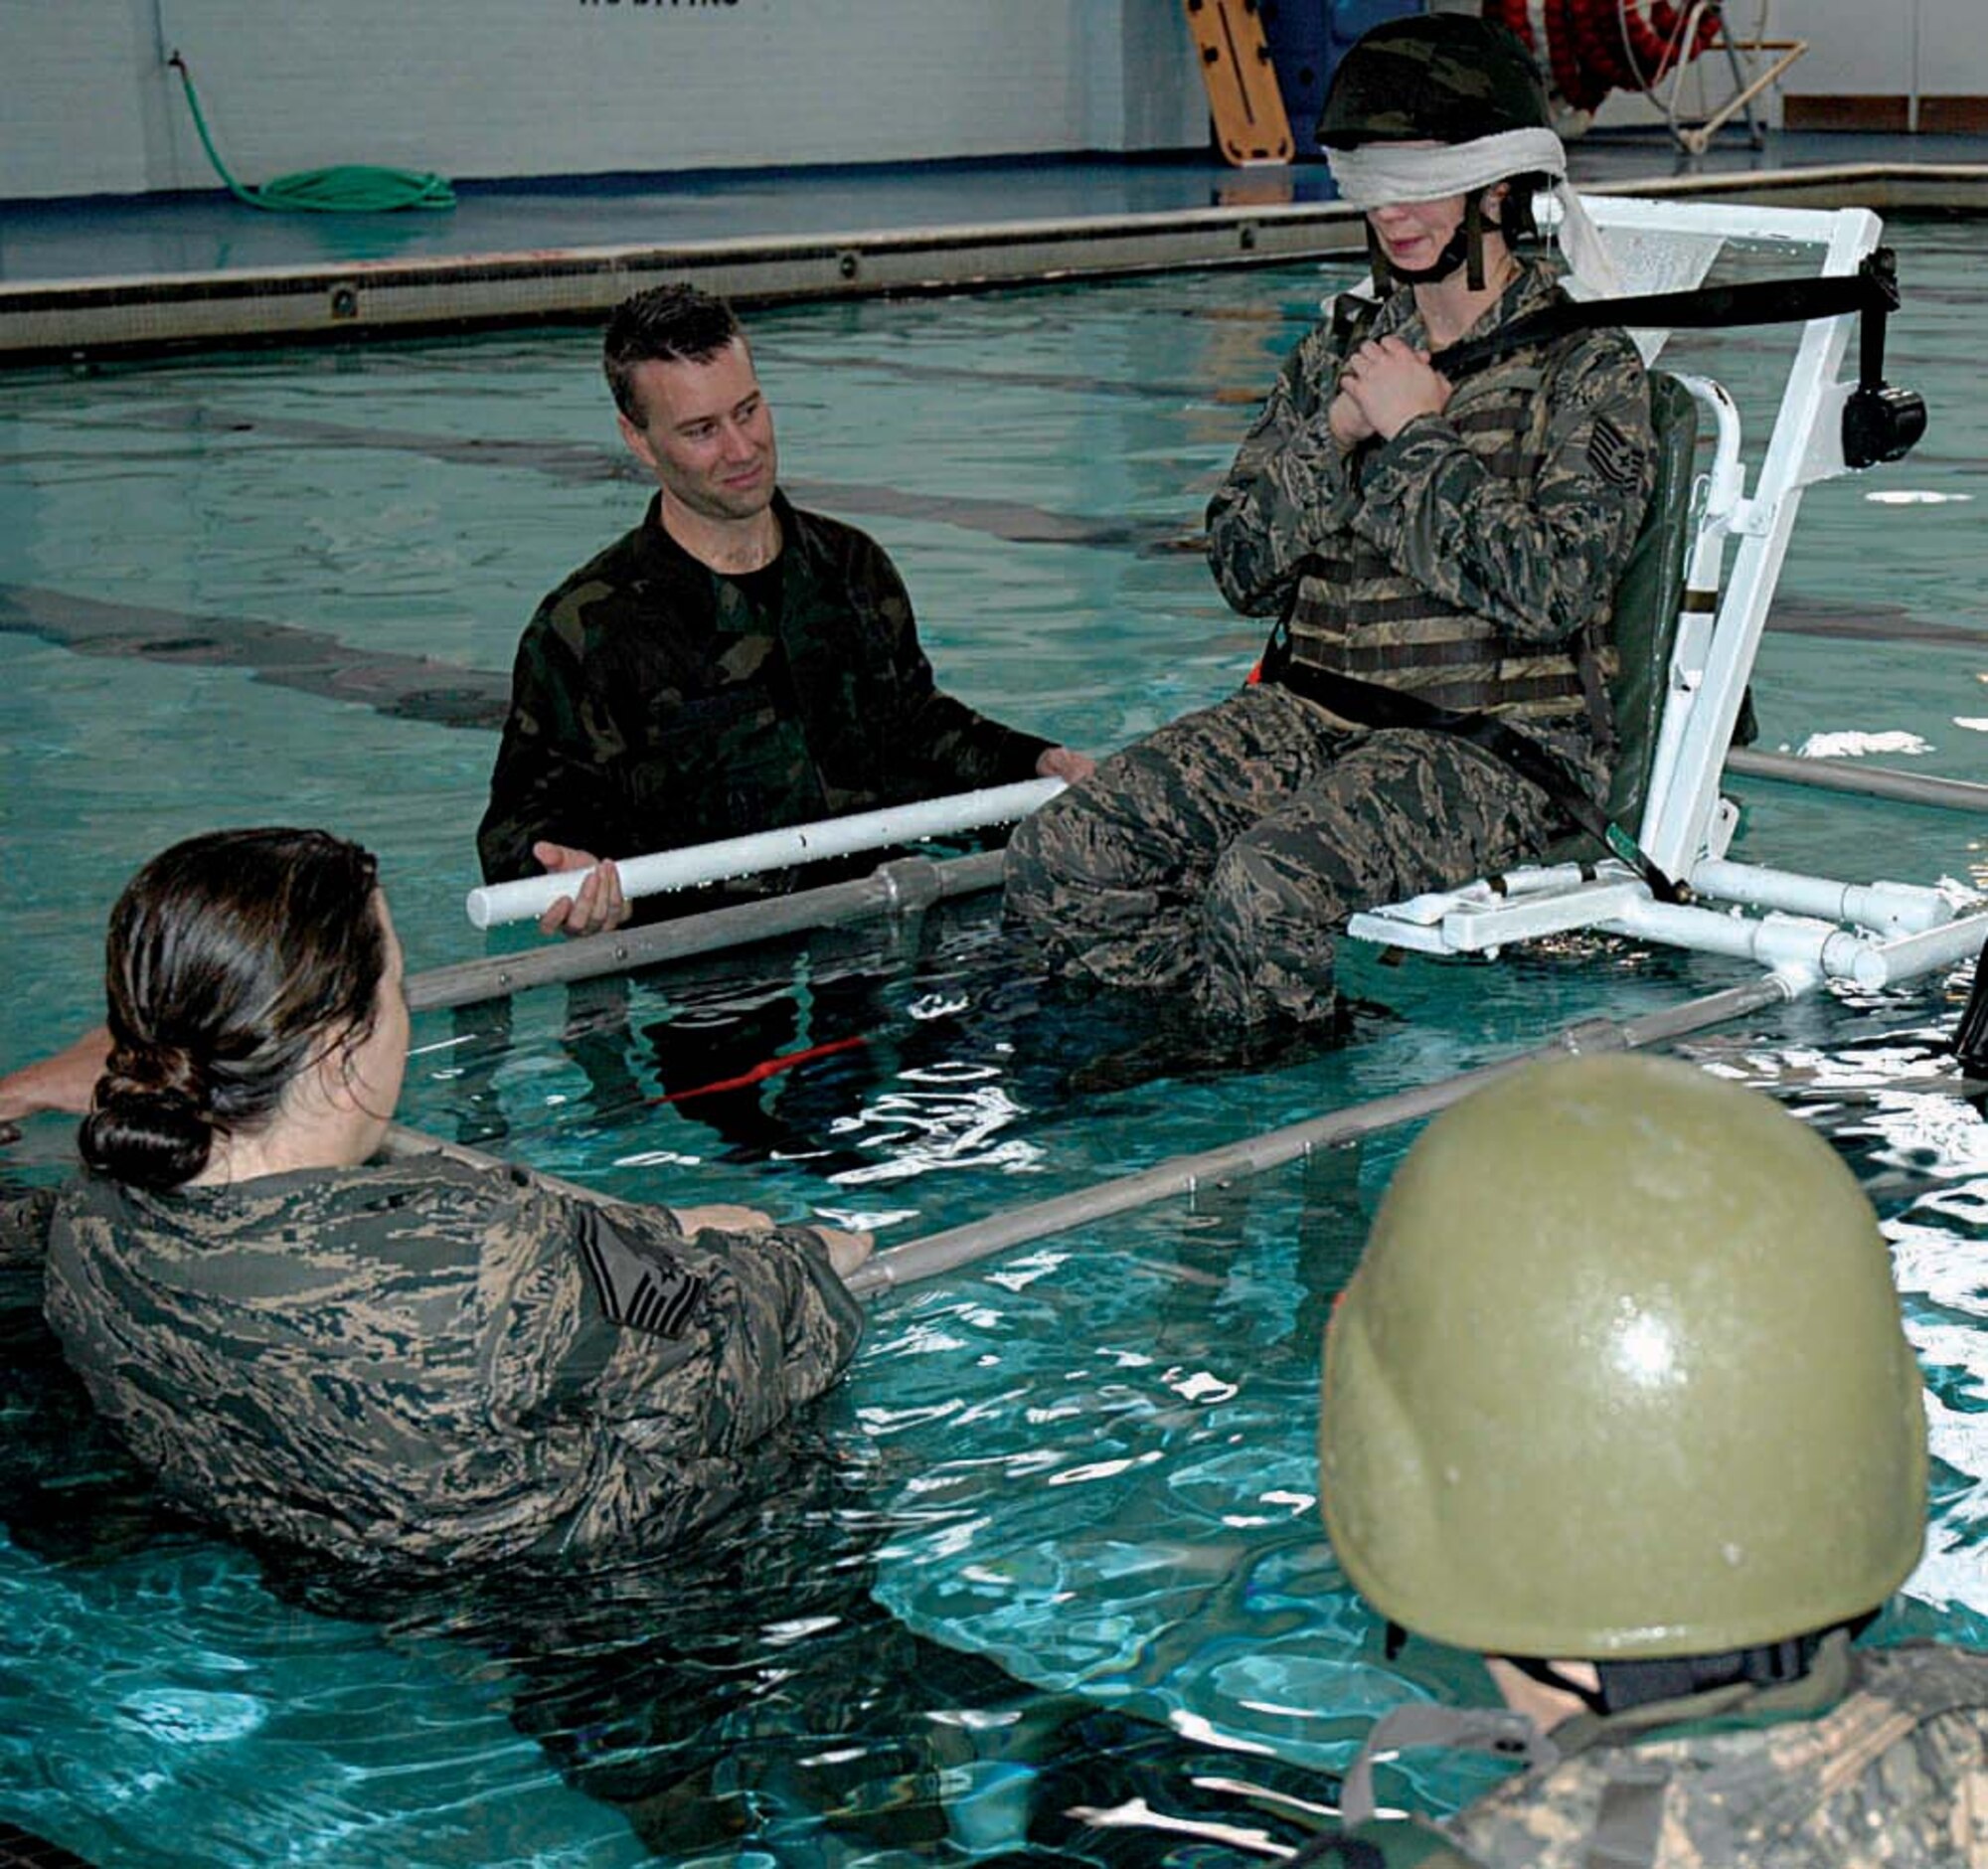 Blinfolded and buckled in, Tech. Sgt. Beth Riser, a Reservist with the 446th Security Forces Squadron, McChord Air Force Base, Wash., is moments away from getting acquainted with the water during Humvee rollover training Feb. 8 at nearby Fort Lewis. (U.S. Air Force photo/Airman First Class Patrick Cabellon)